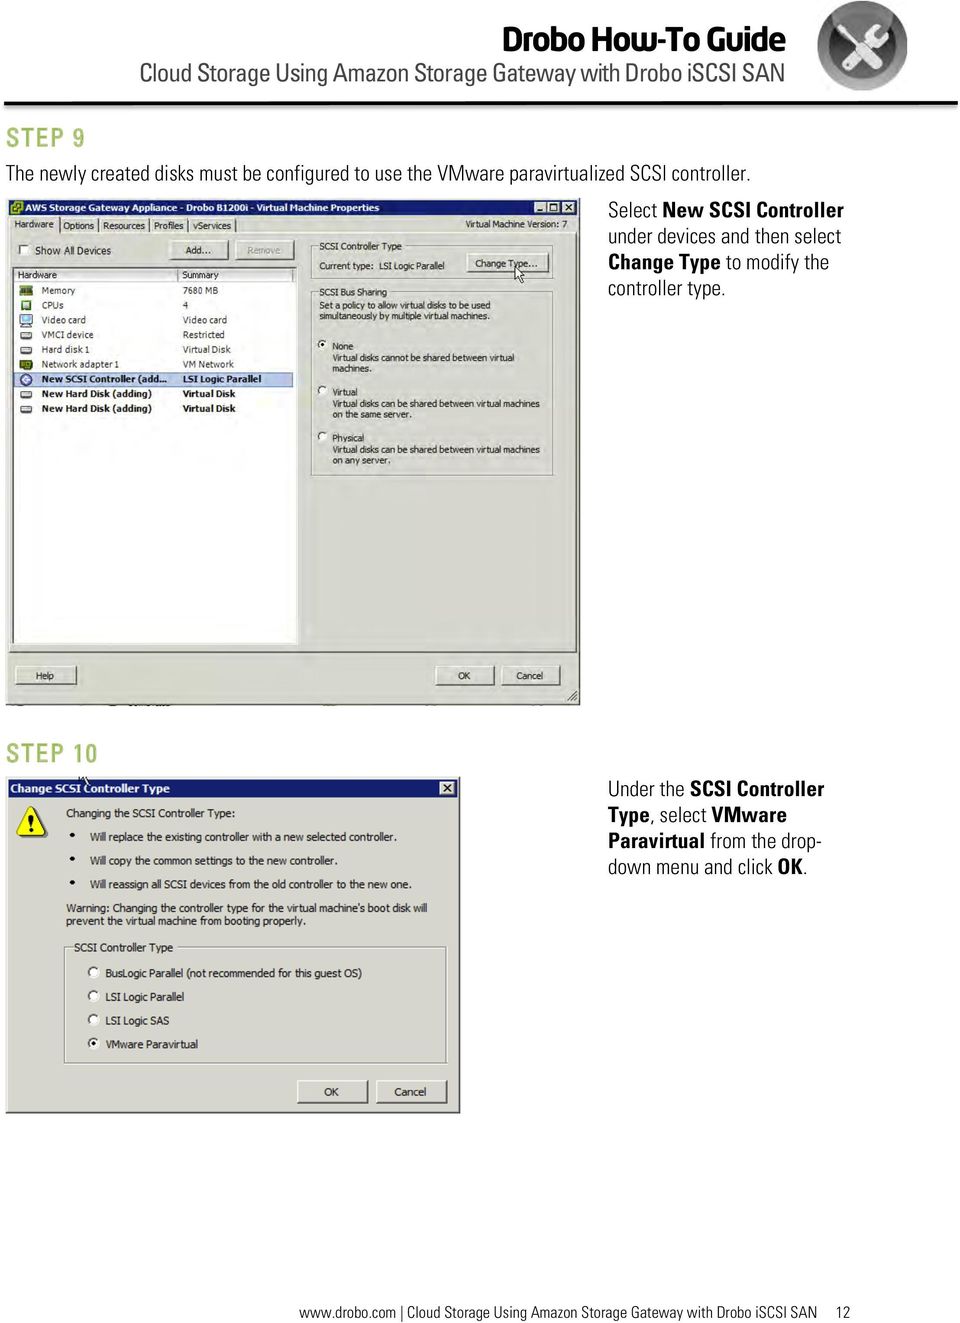 Select New SCSI Controller under devices and then select Change Type to modify the